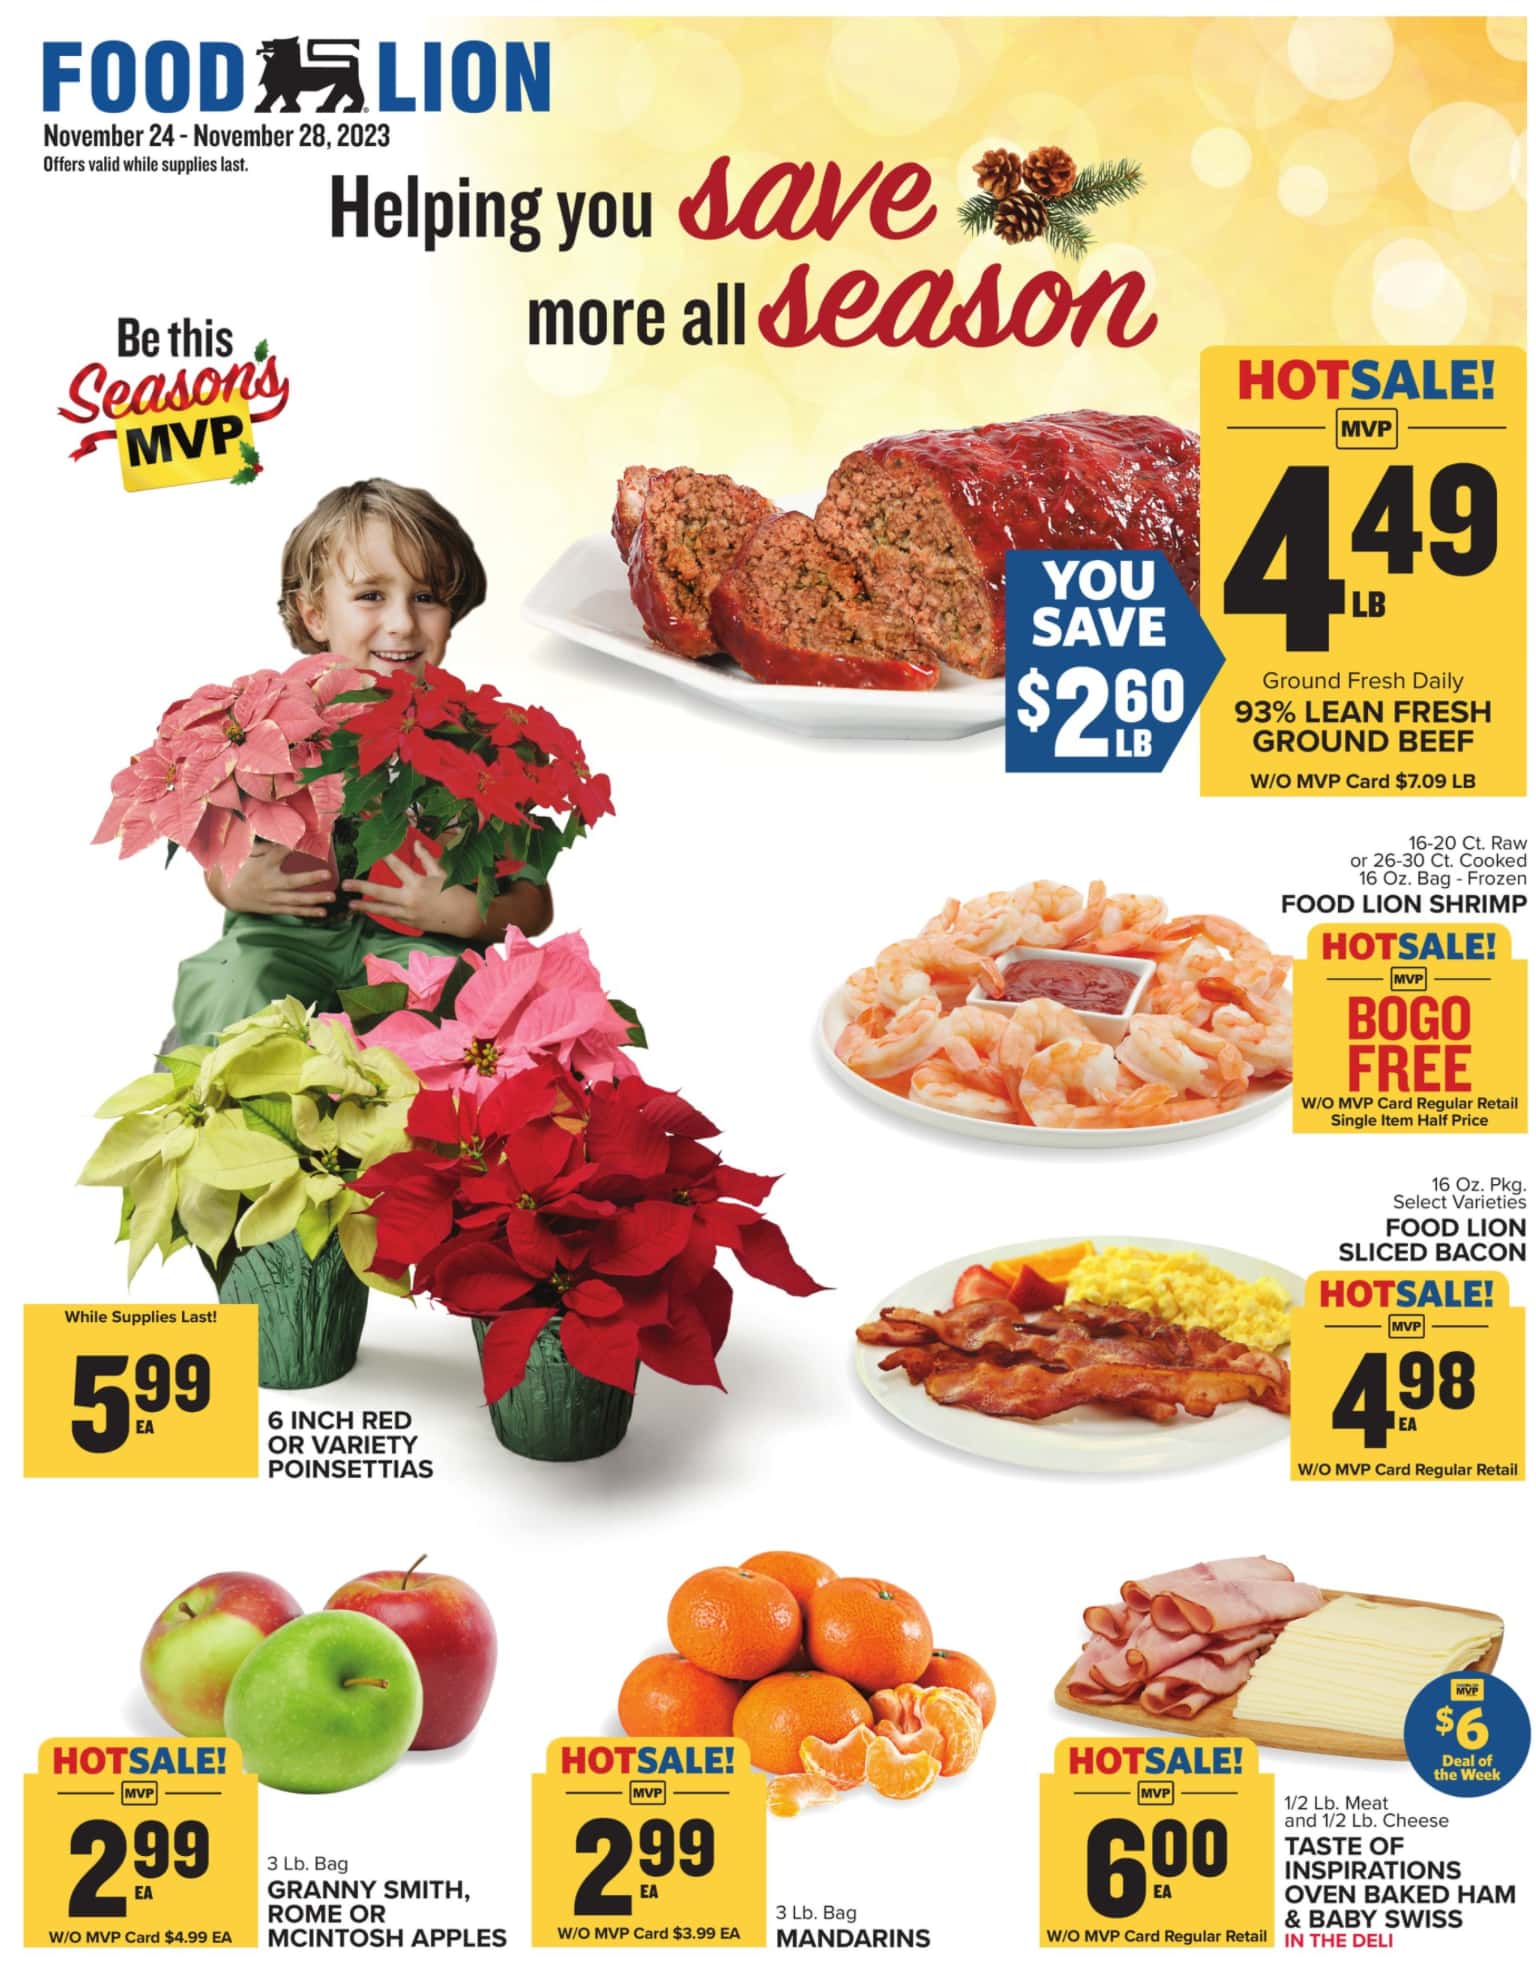 Food Lion Weekly Product Sales